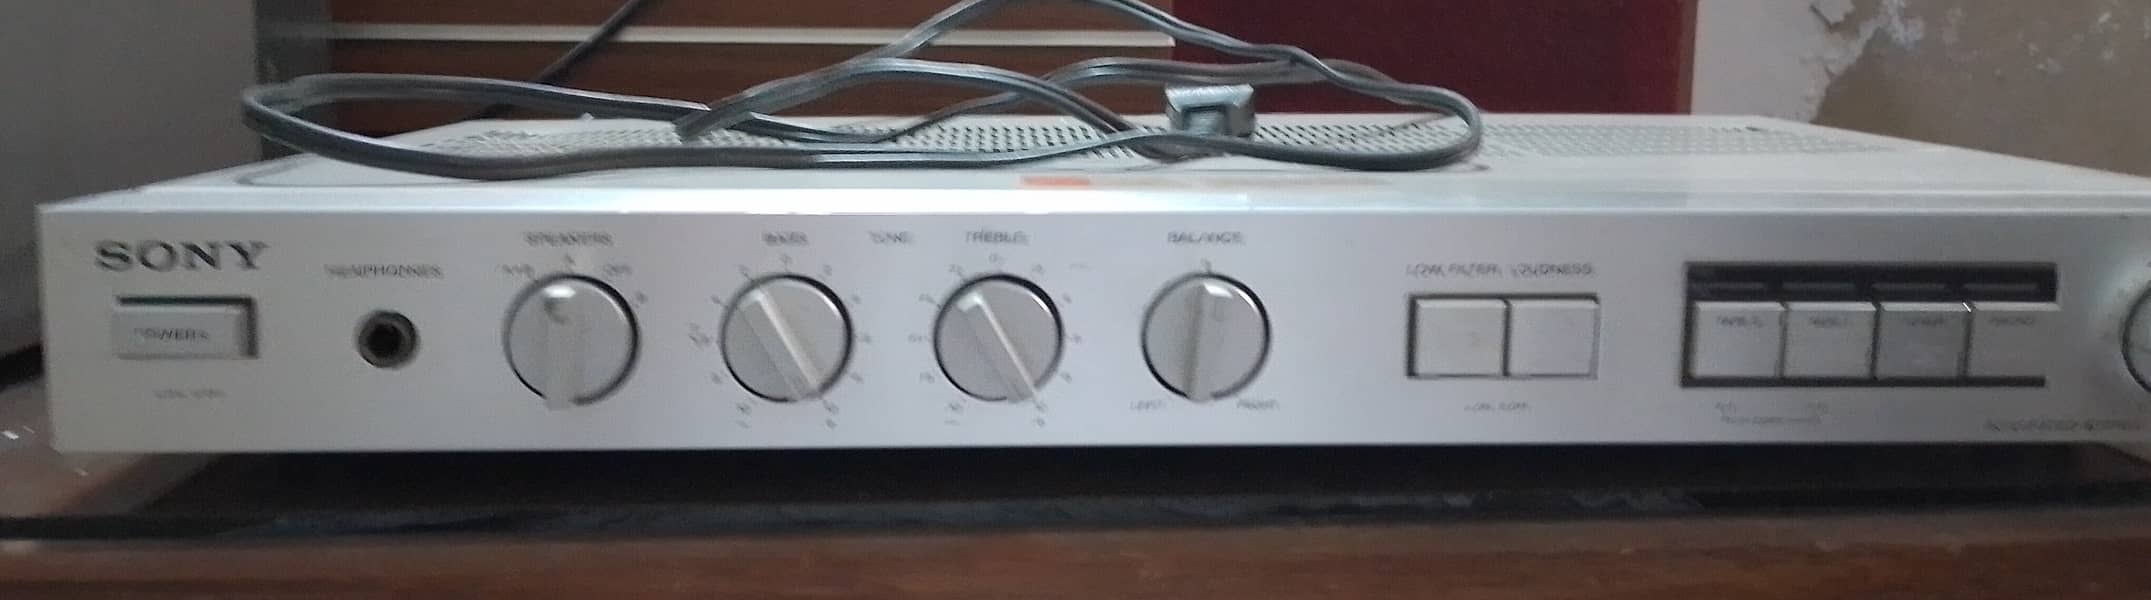 Sony Amplifier & Beny Tone 4 in 1 Music Centre 2